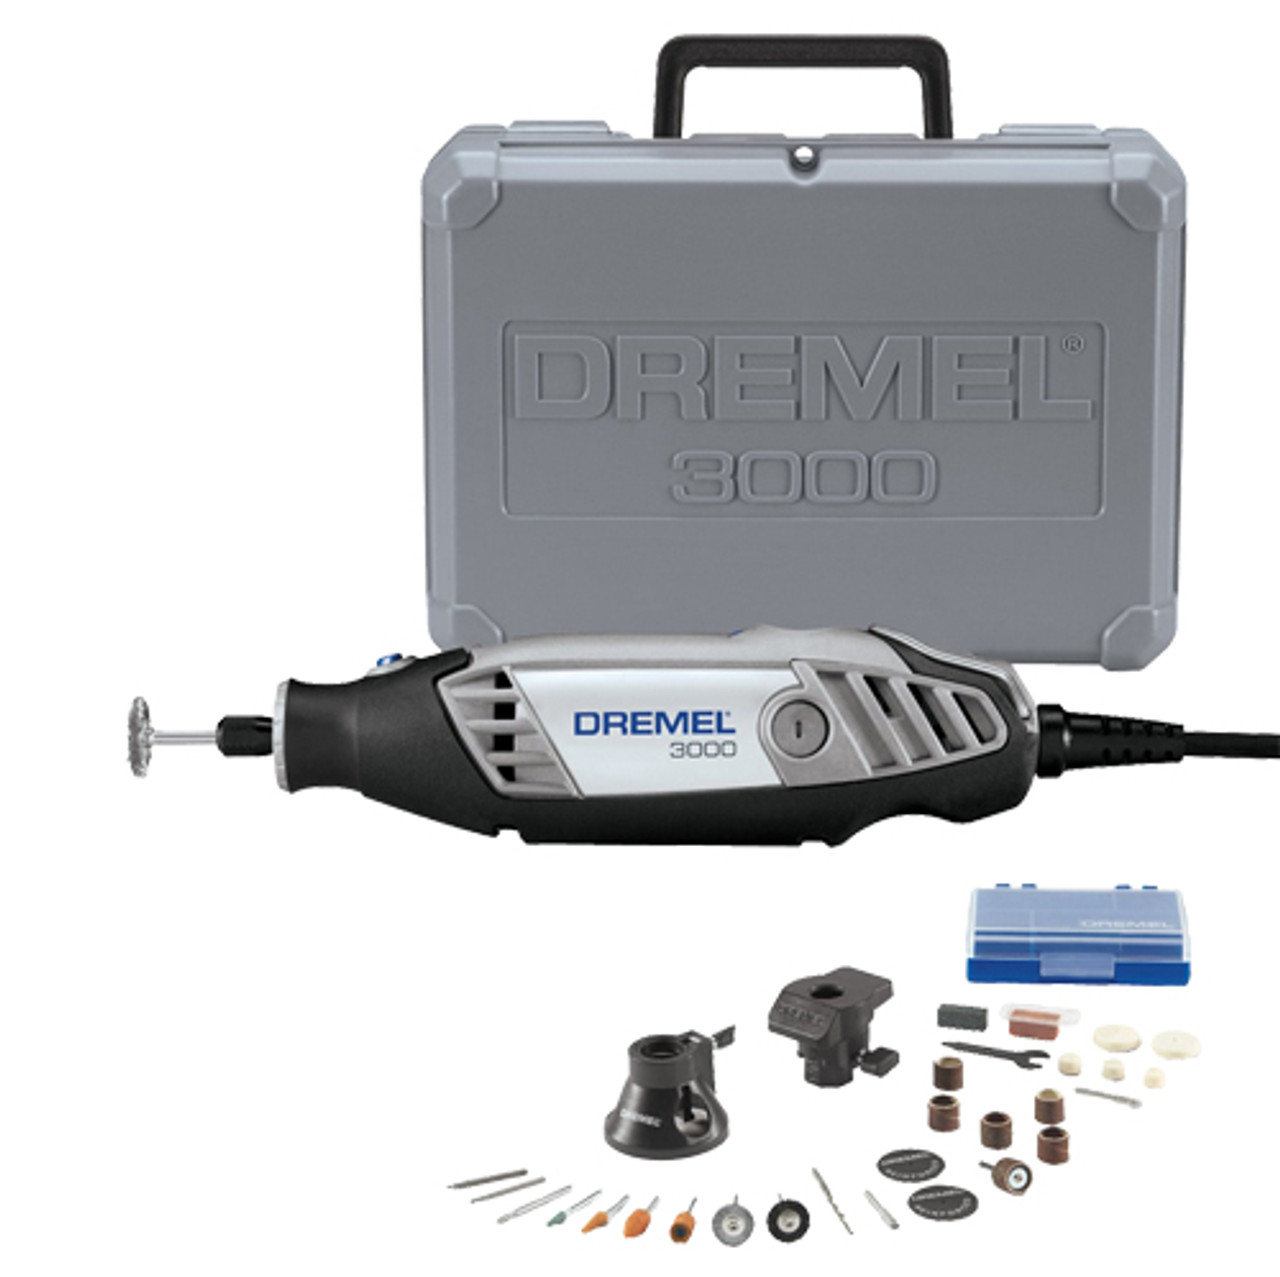 Dremel 3000 Variable Speed Rotary Tool Kit, 28-Piece - Midwest